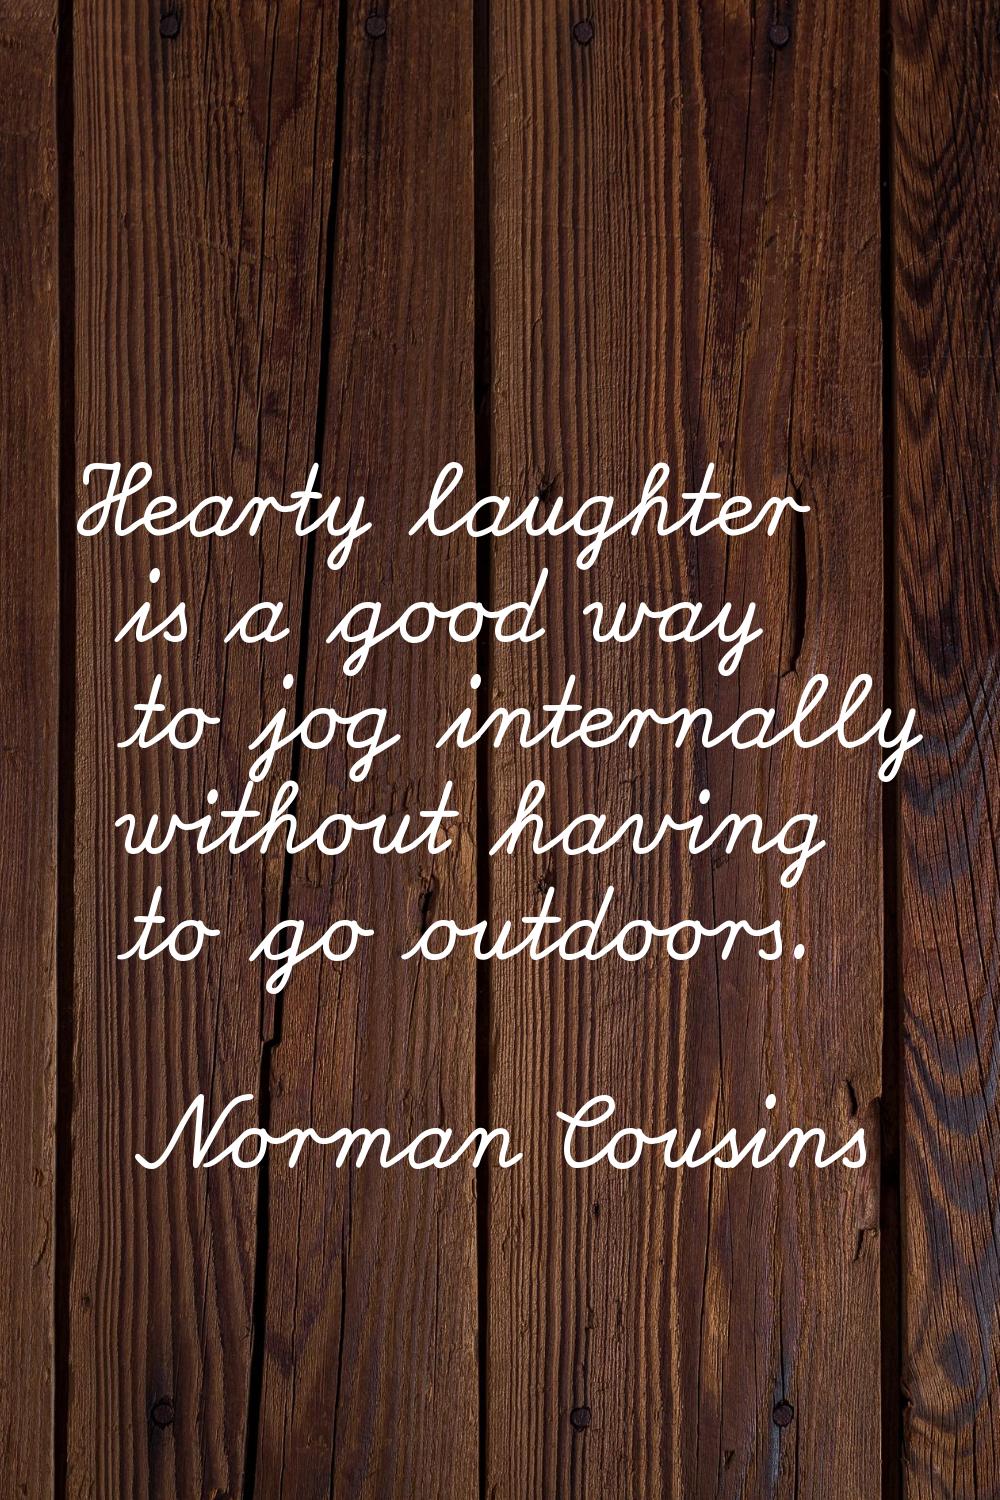 Hearty laughter is a good way to jog internally without having to go outdoors.